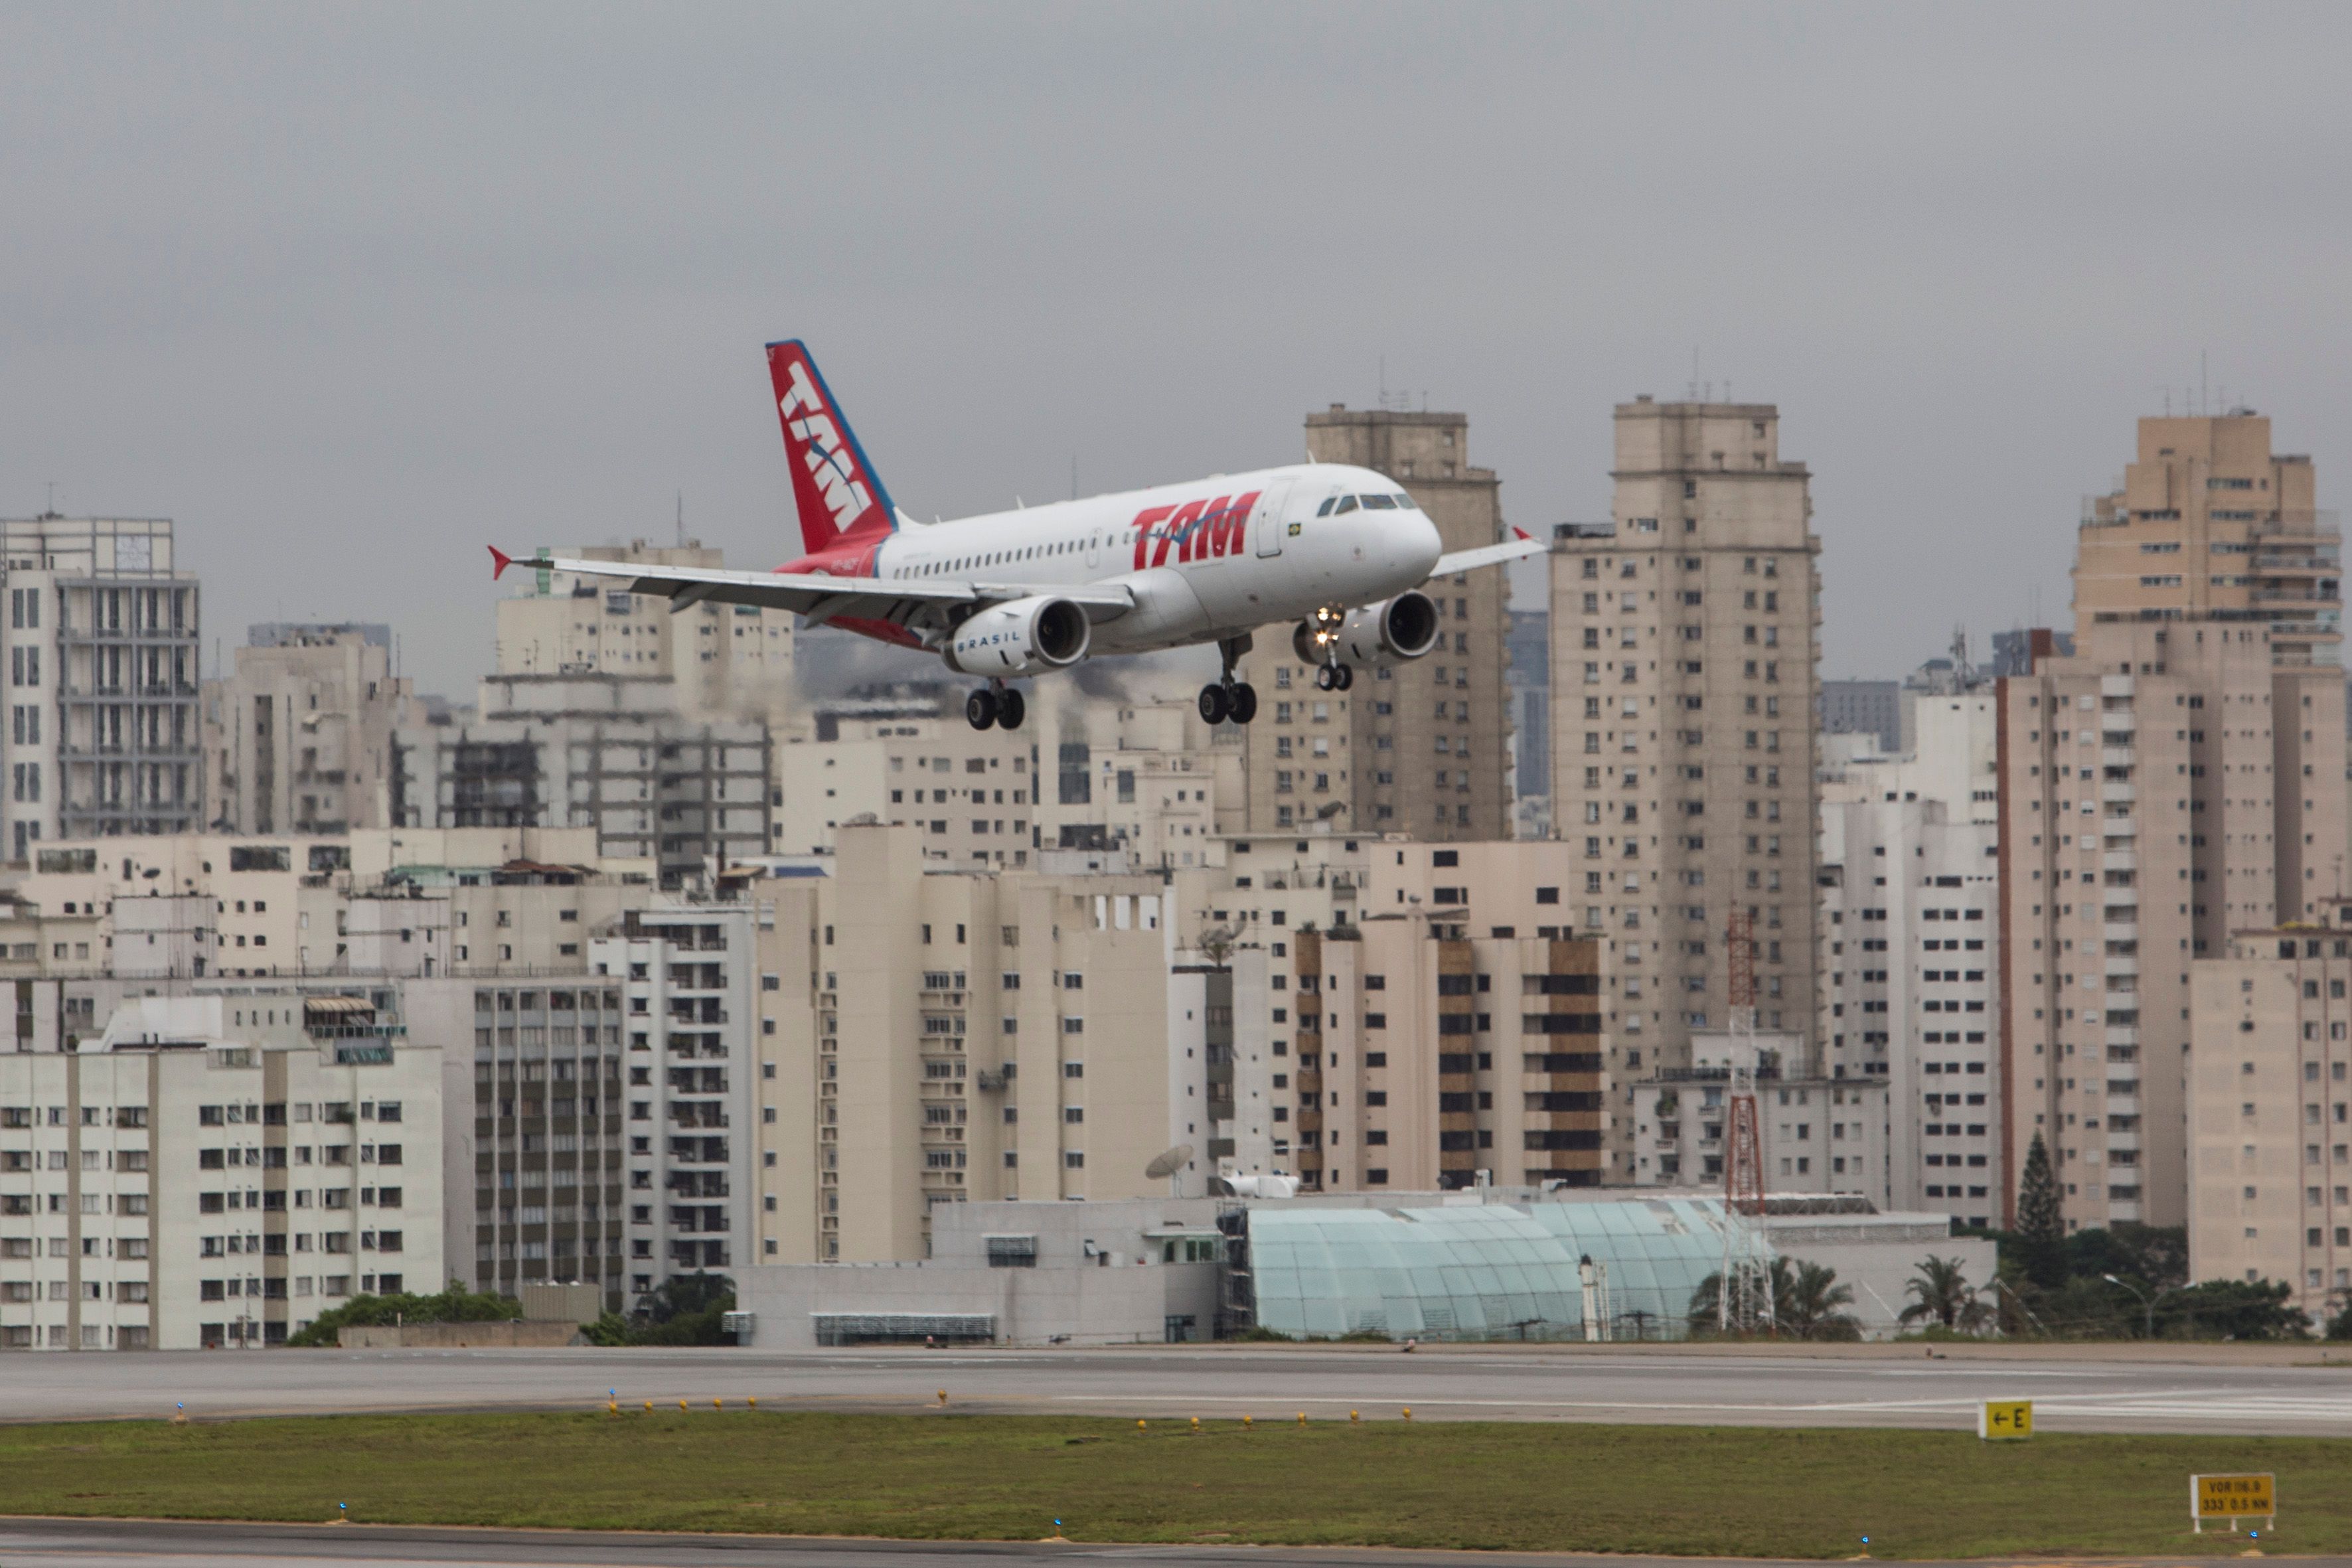 A plane prepares to land at Congonhas Airport, in Sao Paulo, Brazil